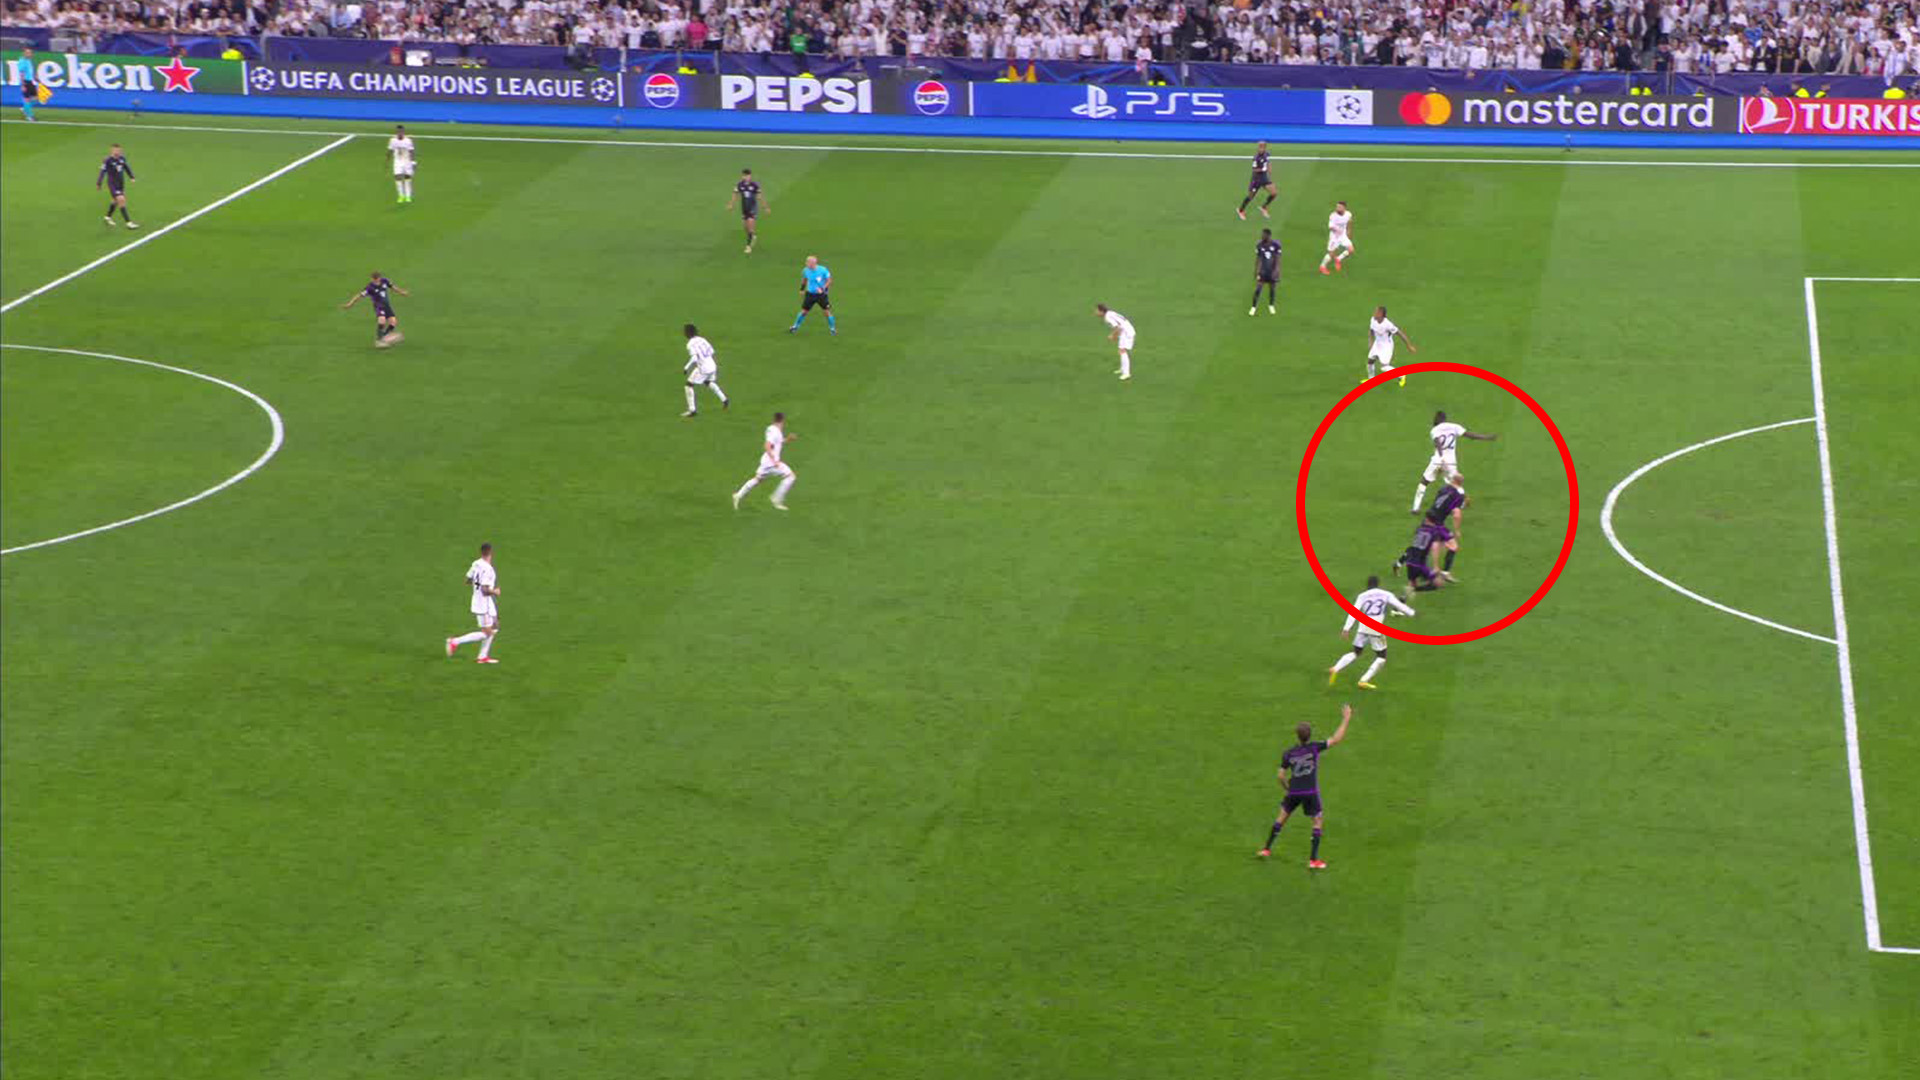 Bayern Munich players (in black) were deemed to be offside by the assistant referee.